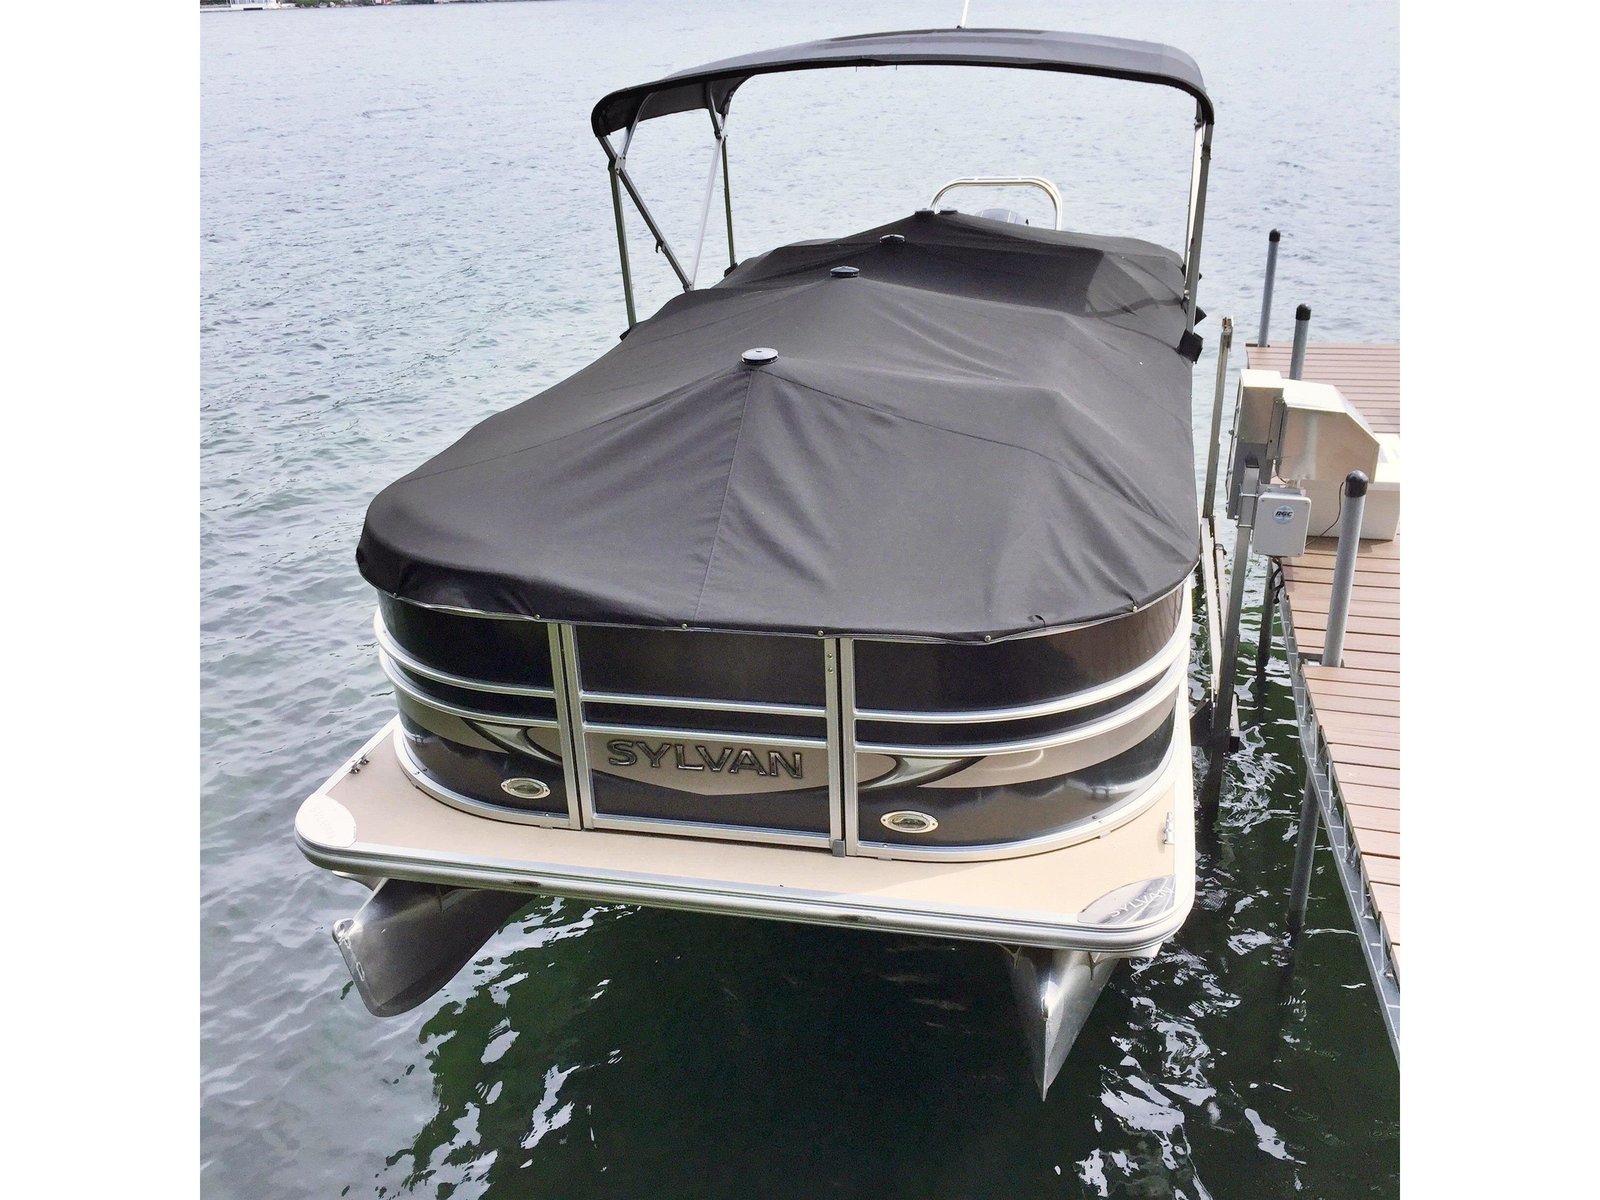 Pontoon Boat is Included